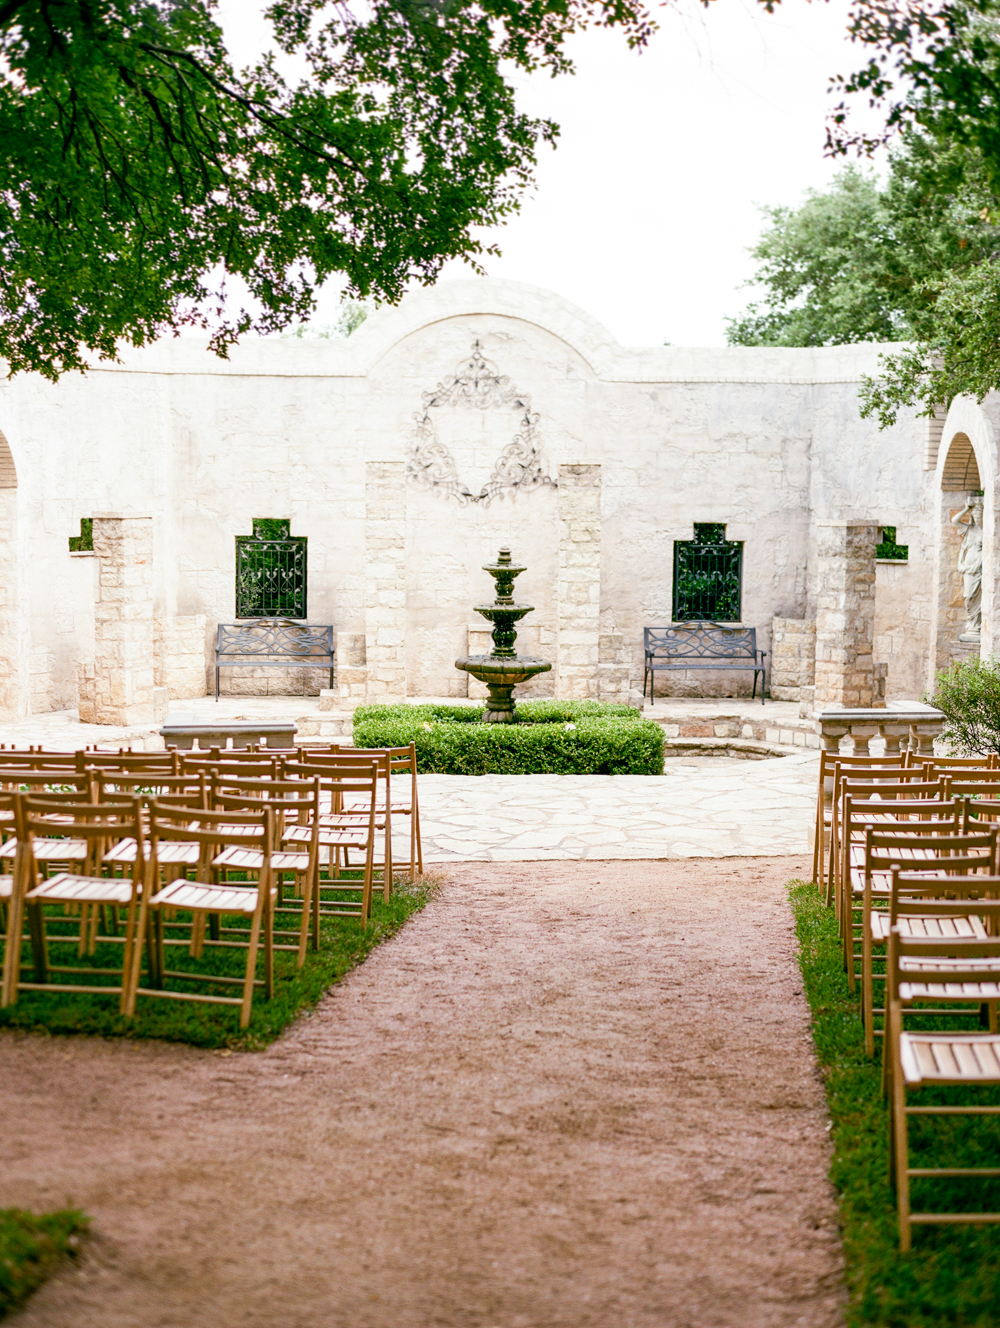 Best Austin Wedding Venues, Dripping Springs Wedding Venues, interracial Austin wedding, austin Wedding Photographers, Austin marriage proposal, downtown Austin proposal, Austin proposal photographers, Austin proposal photographer, engagement photos in downtown austin, downtown austin engagement photos, awesome engagement photos in austin, downtown austin photo spots, austin engagement photos, engagement session in austin, austin engagement session, austin wedding photographer, austin wedding photos, wedding photos in austin, colorful austin photographer, fine art austin photographer, fine art austin wedding photographer, wedding photographer in austin, austin wedding ideas, engagement photo ideas in austin, spring wedding inspiration